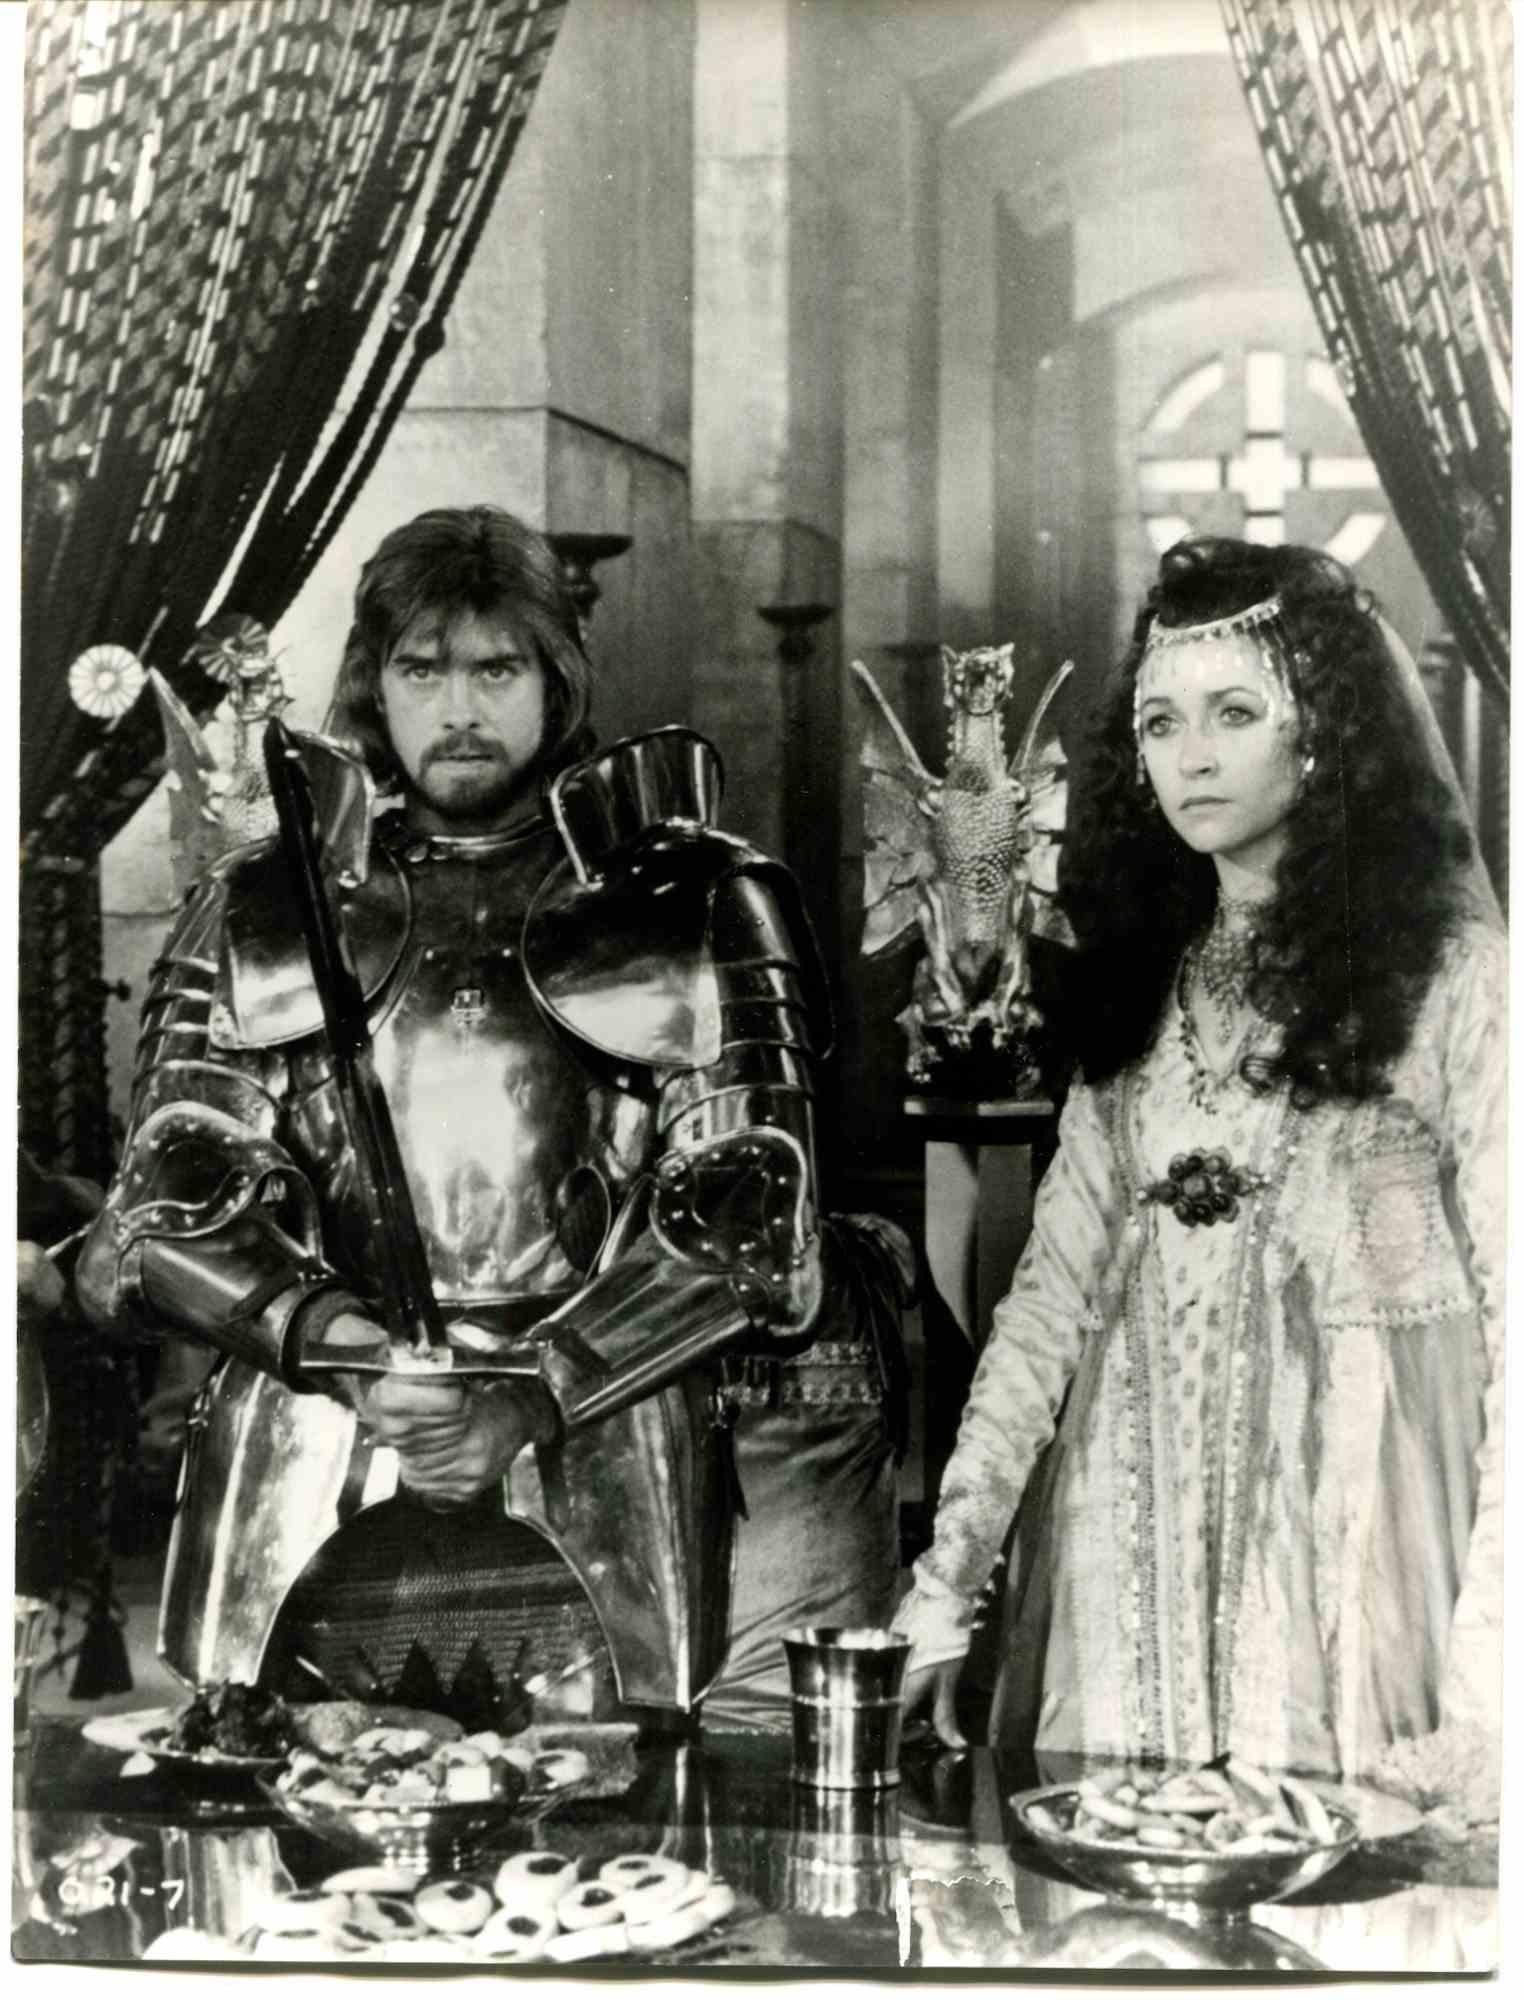 Unknown Portrait Photograph - Cherie Lunghi and Nigel Terry on the set of "Excalibur" - 1981